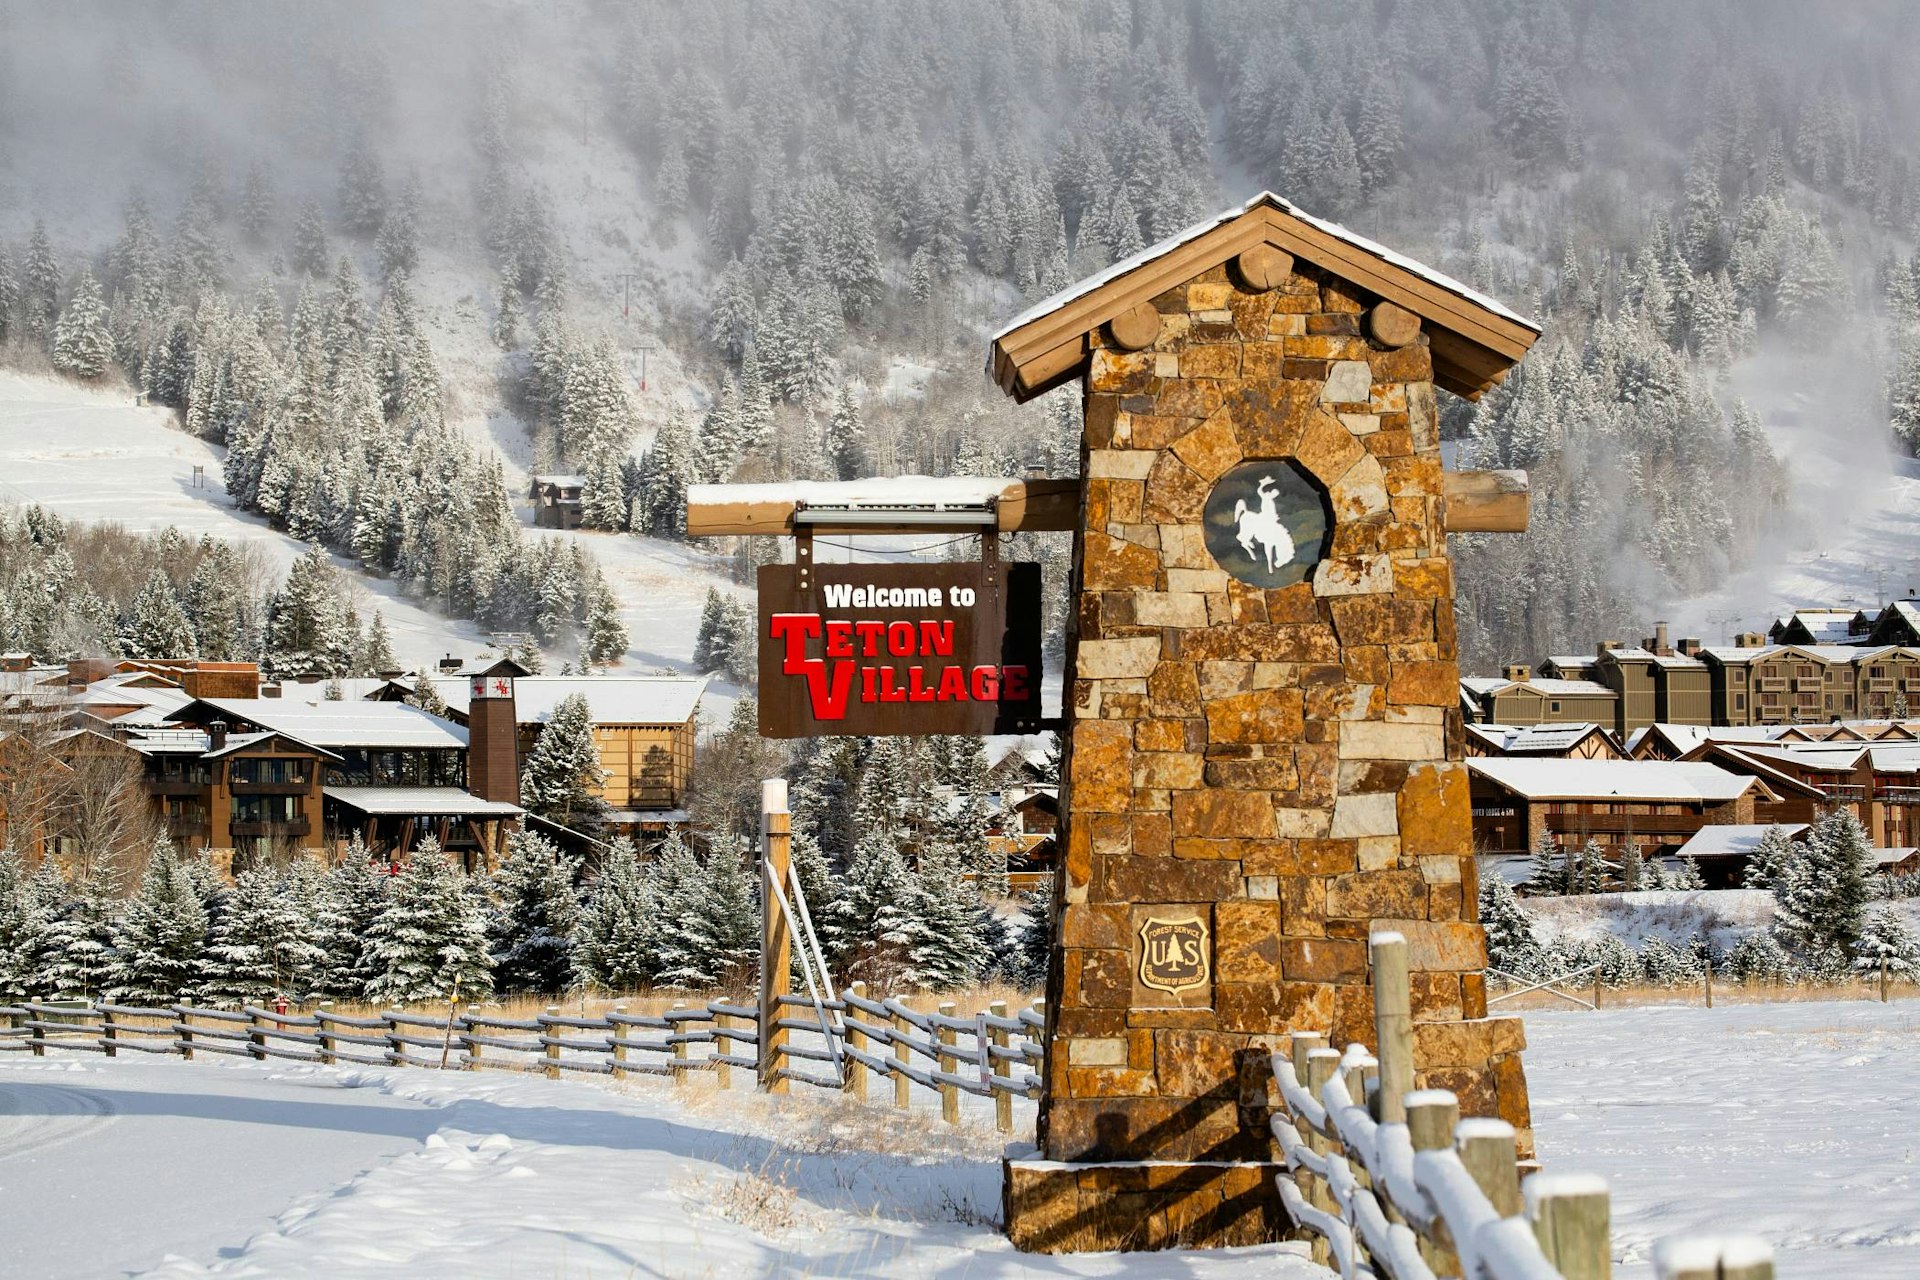 The Welcome to Teton Village sign